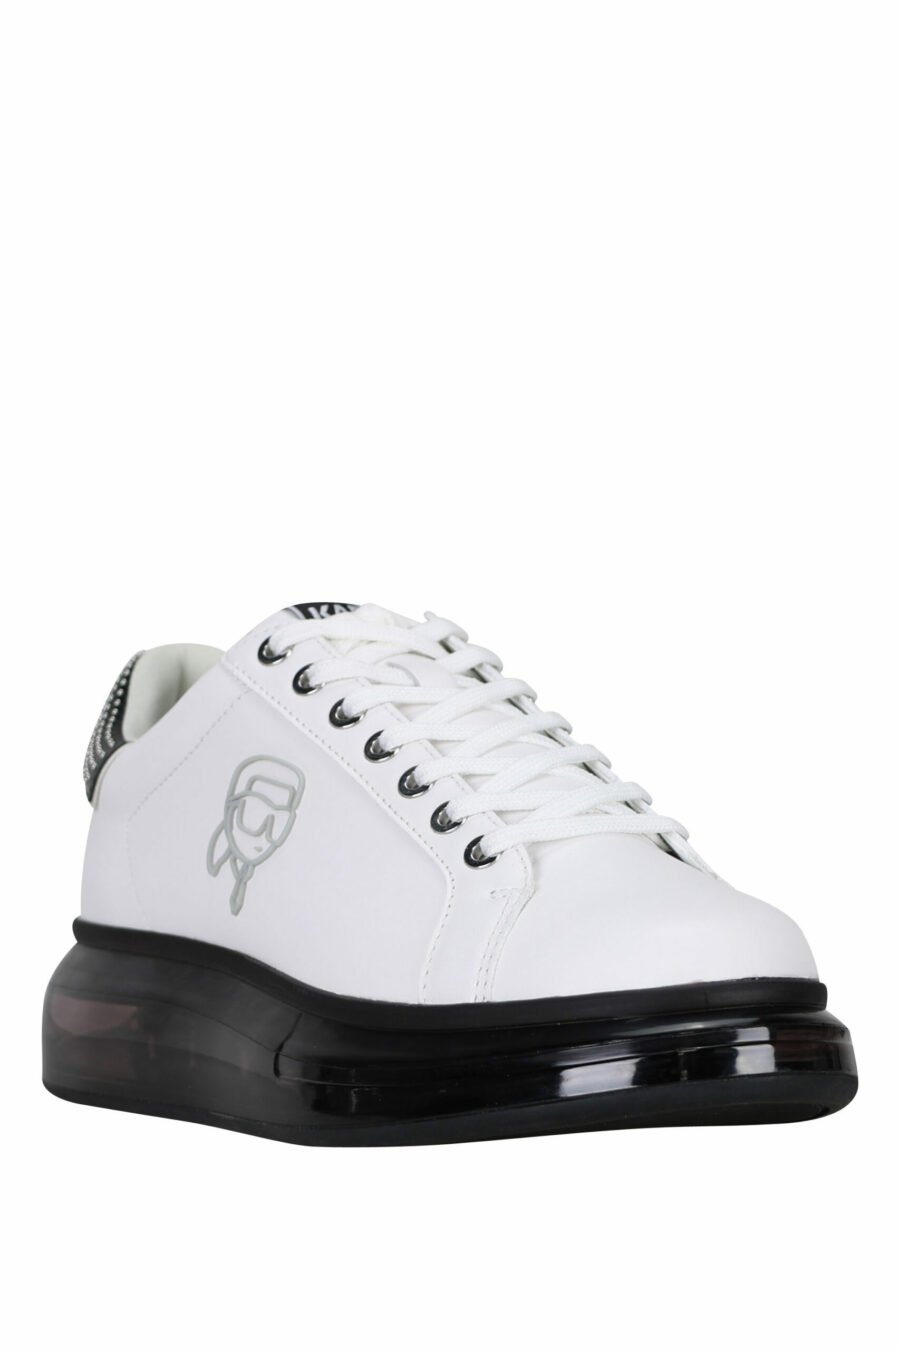 White trainers "kapri fushion" with black sole and logo in outline - 5059529363467 1 scaled